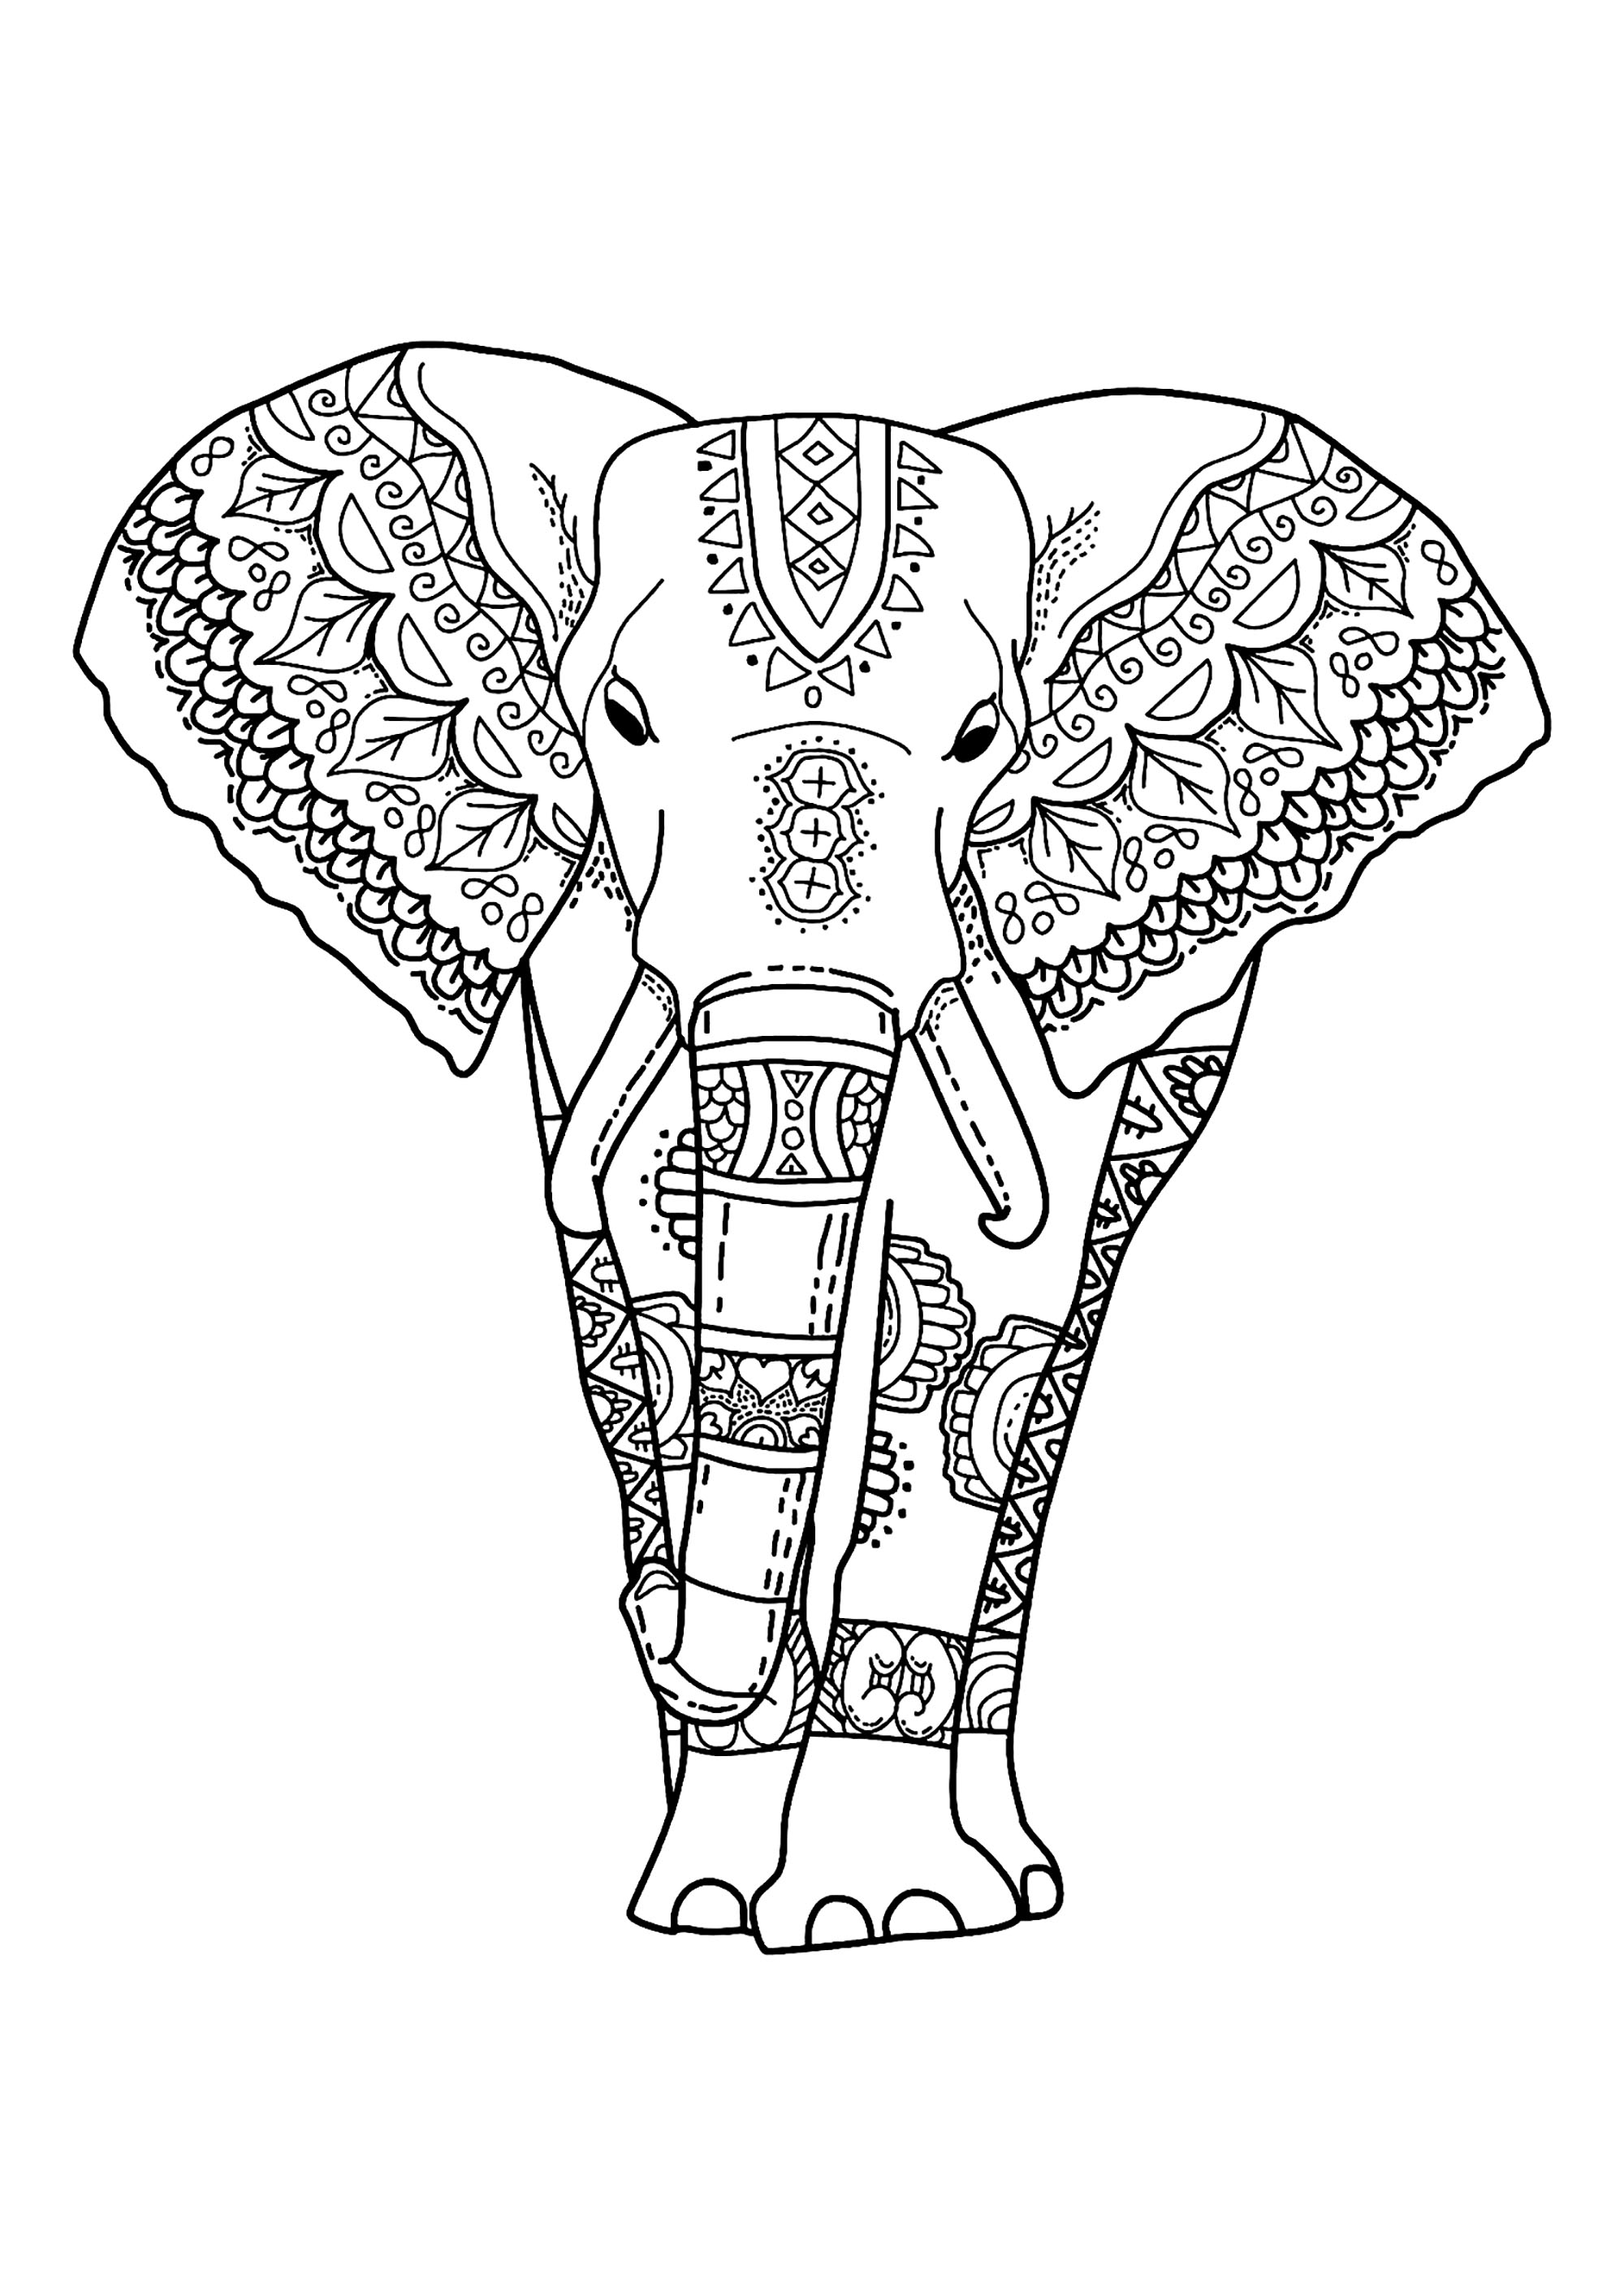 Elephant coloring pages to download - Elephants Kids Coloring Pages